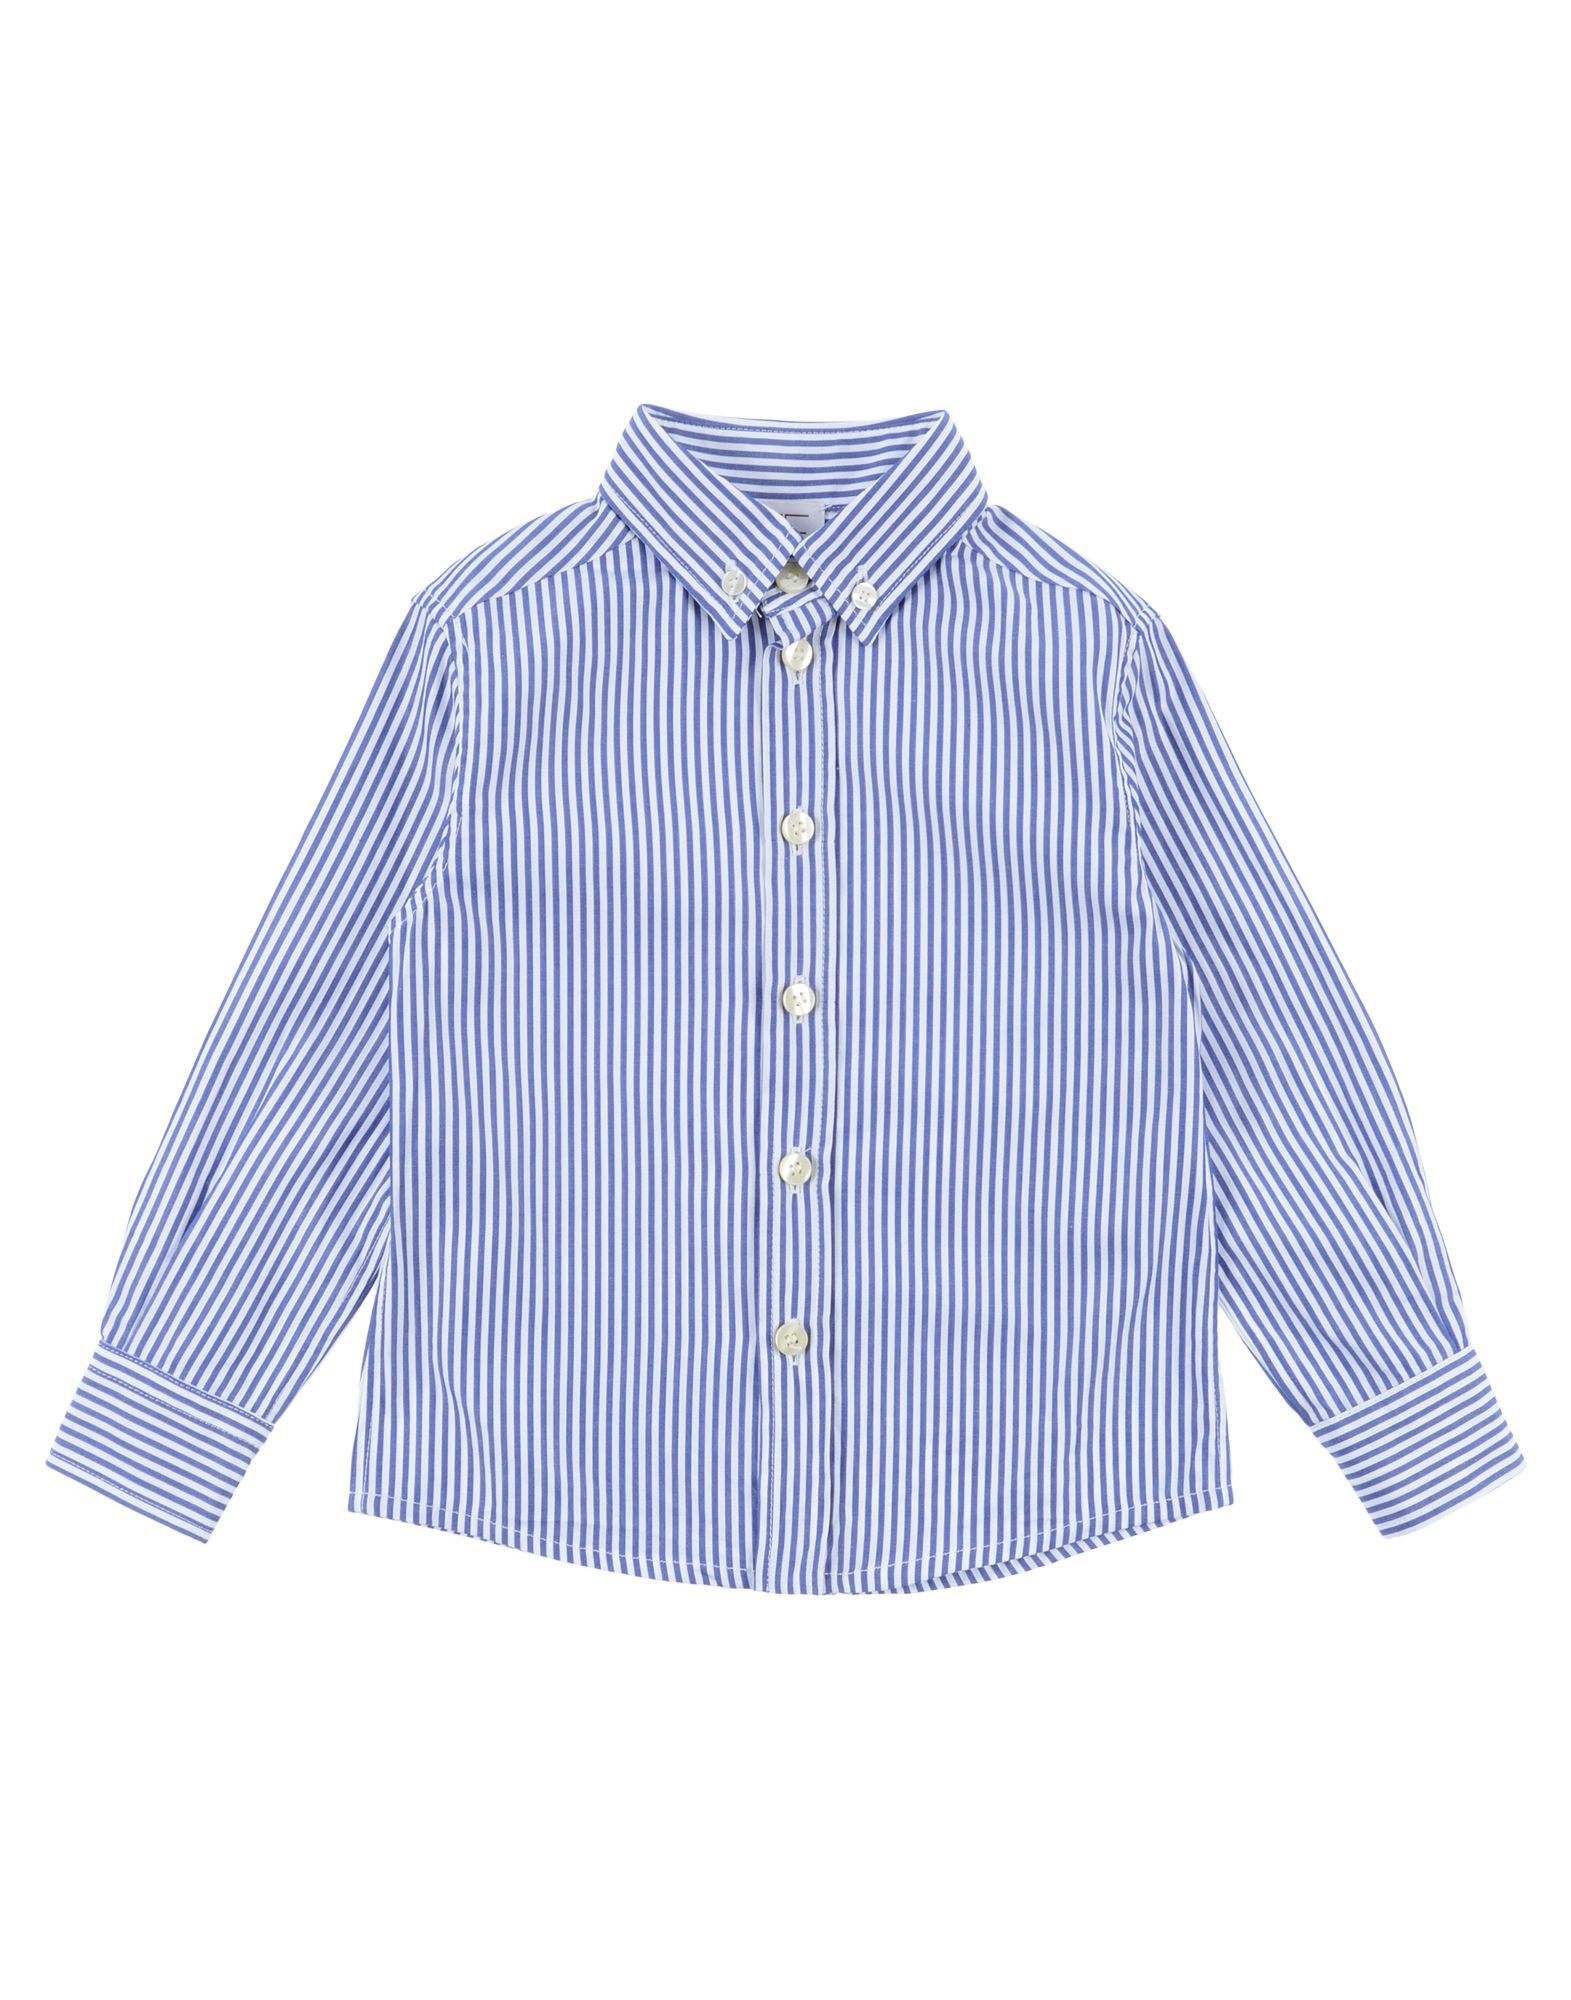 plain weave, no appliqués, stripes, rear closure, button closing, long sleeves, buttoned cuffs, classic neckline, no pockets, wash at 30° c, dry cleanable, iron at 110° c max, do not bleach, do not tumble dry